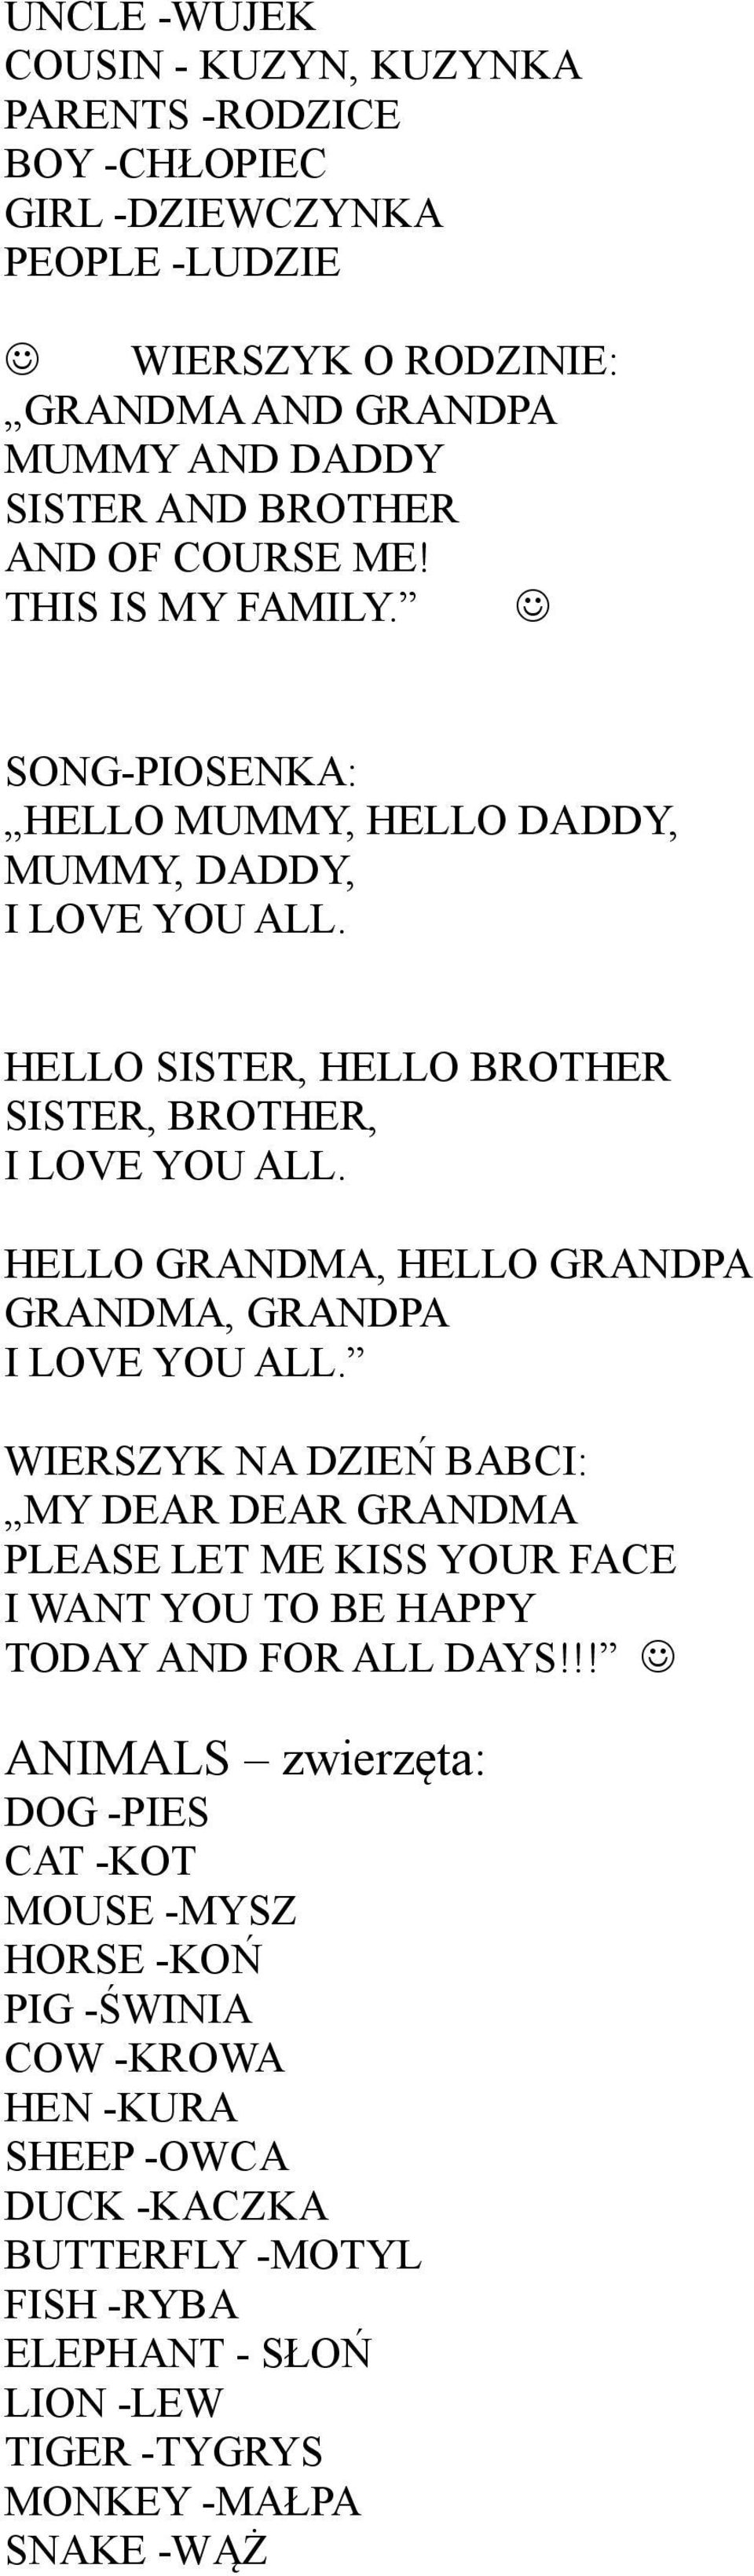 HELLO GRANDMA, HELLO GRANDPA GRANDMA, GRANDPA I LOVE YOU ALL. WIERSZYK NA DZIEŃ BABCI: MY DEAR DEAR GRANDMA PLEASE LET ME KISS YOUR FACE I WANT YOU TO BE HAPPY TODAY AND FOR ALL DAYS!